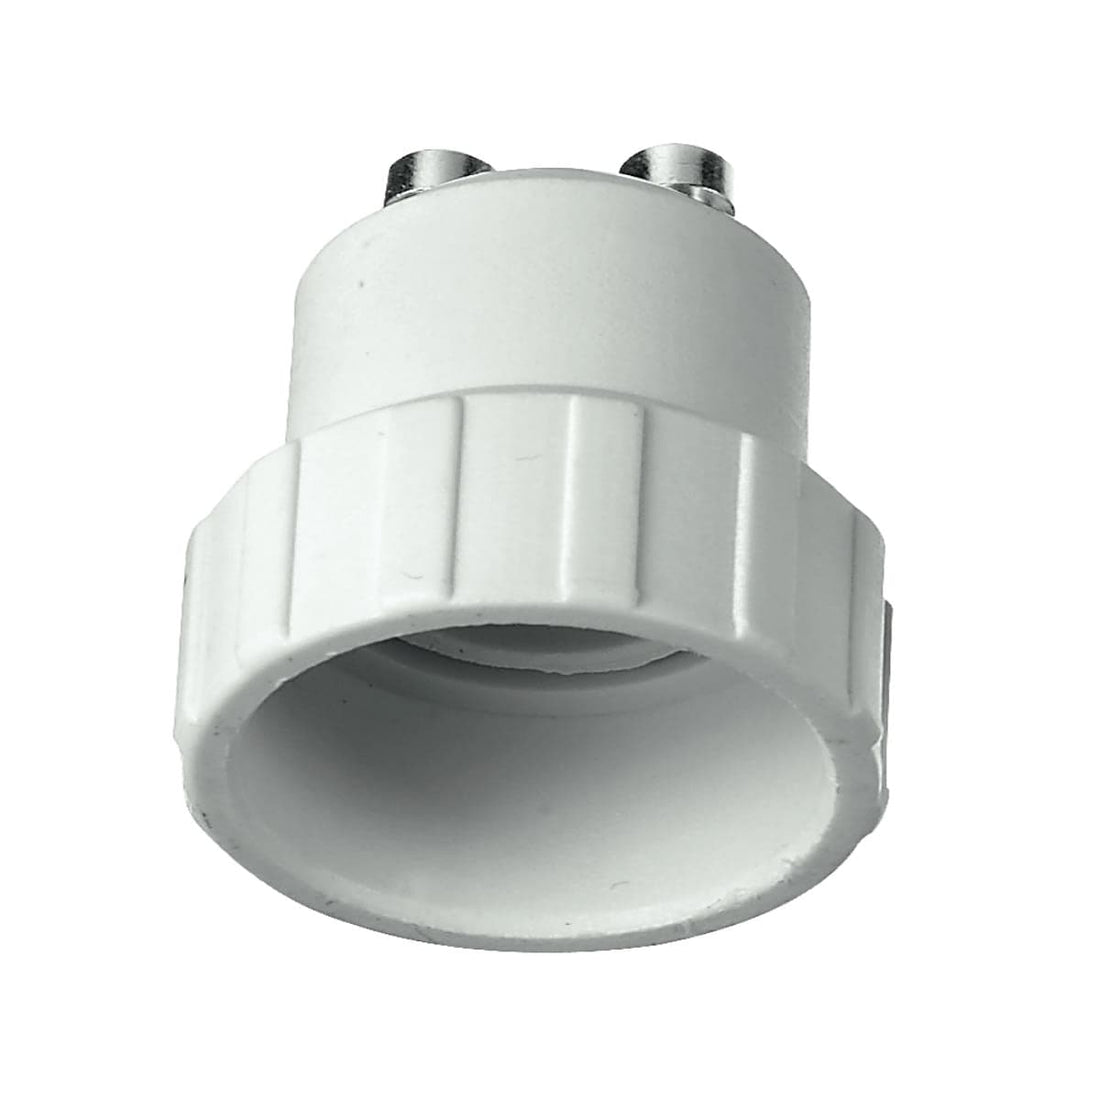 ADAPTER FOR GU10 TO E14 LAMPS - best price from Maltashopper.com BR420000236